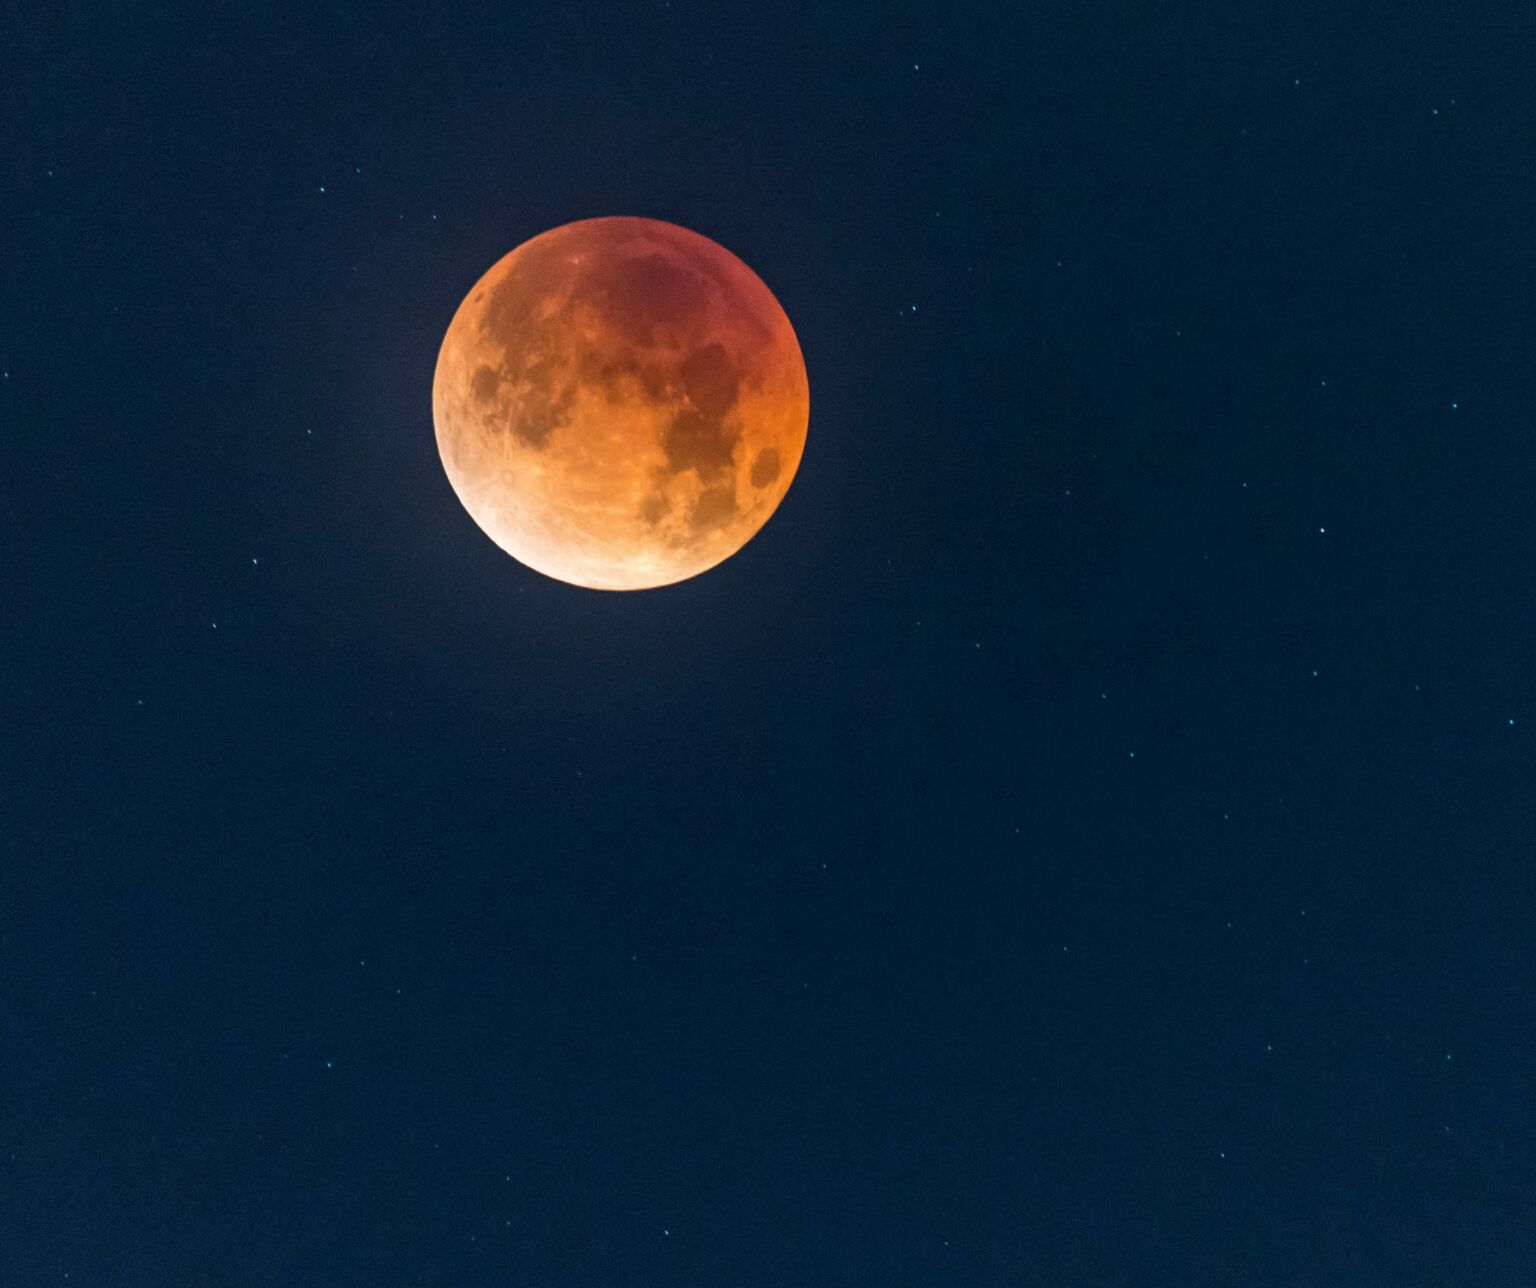 May 26th Lunar Eclipse to Delight Observers Around the World DarkSky